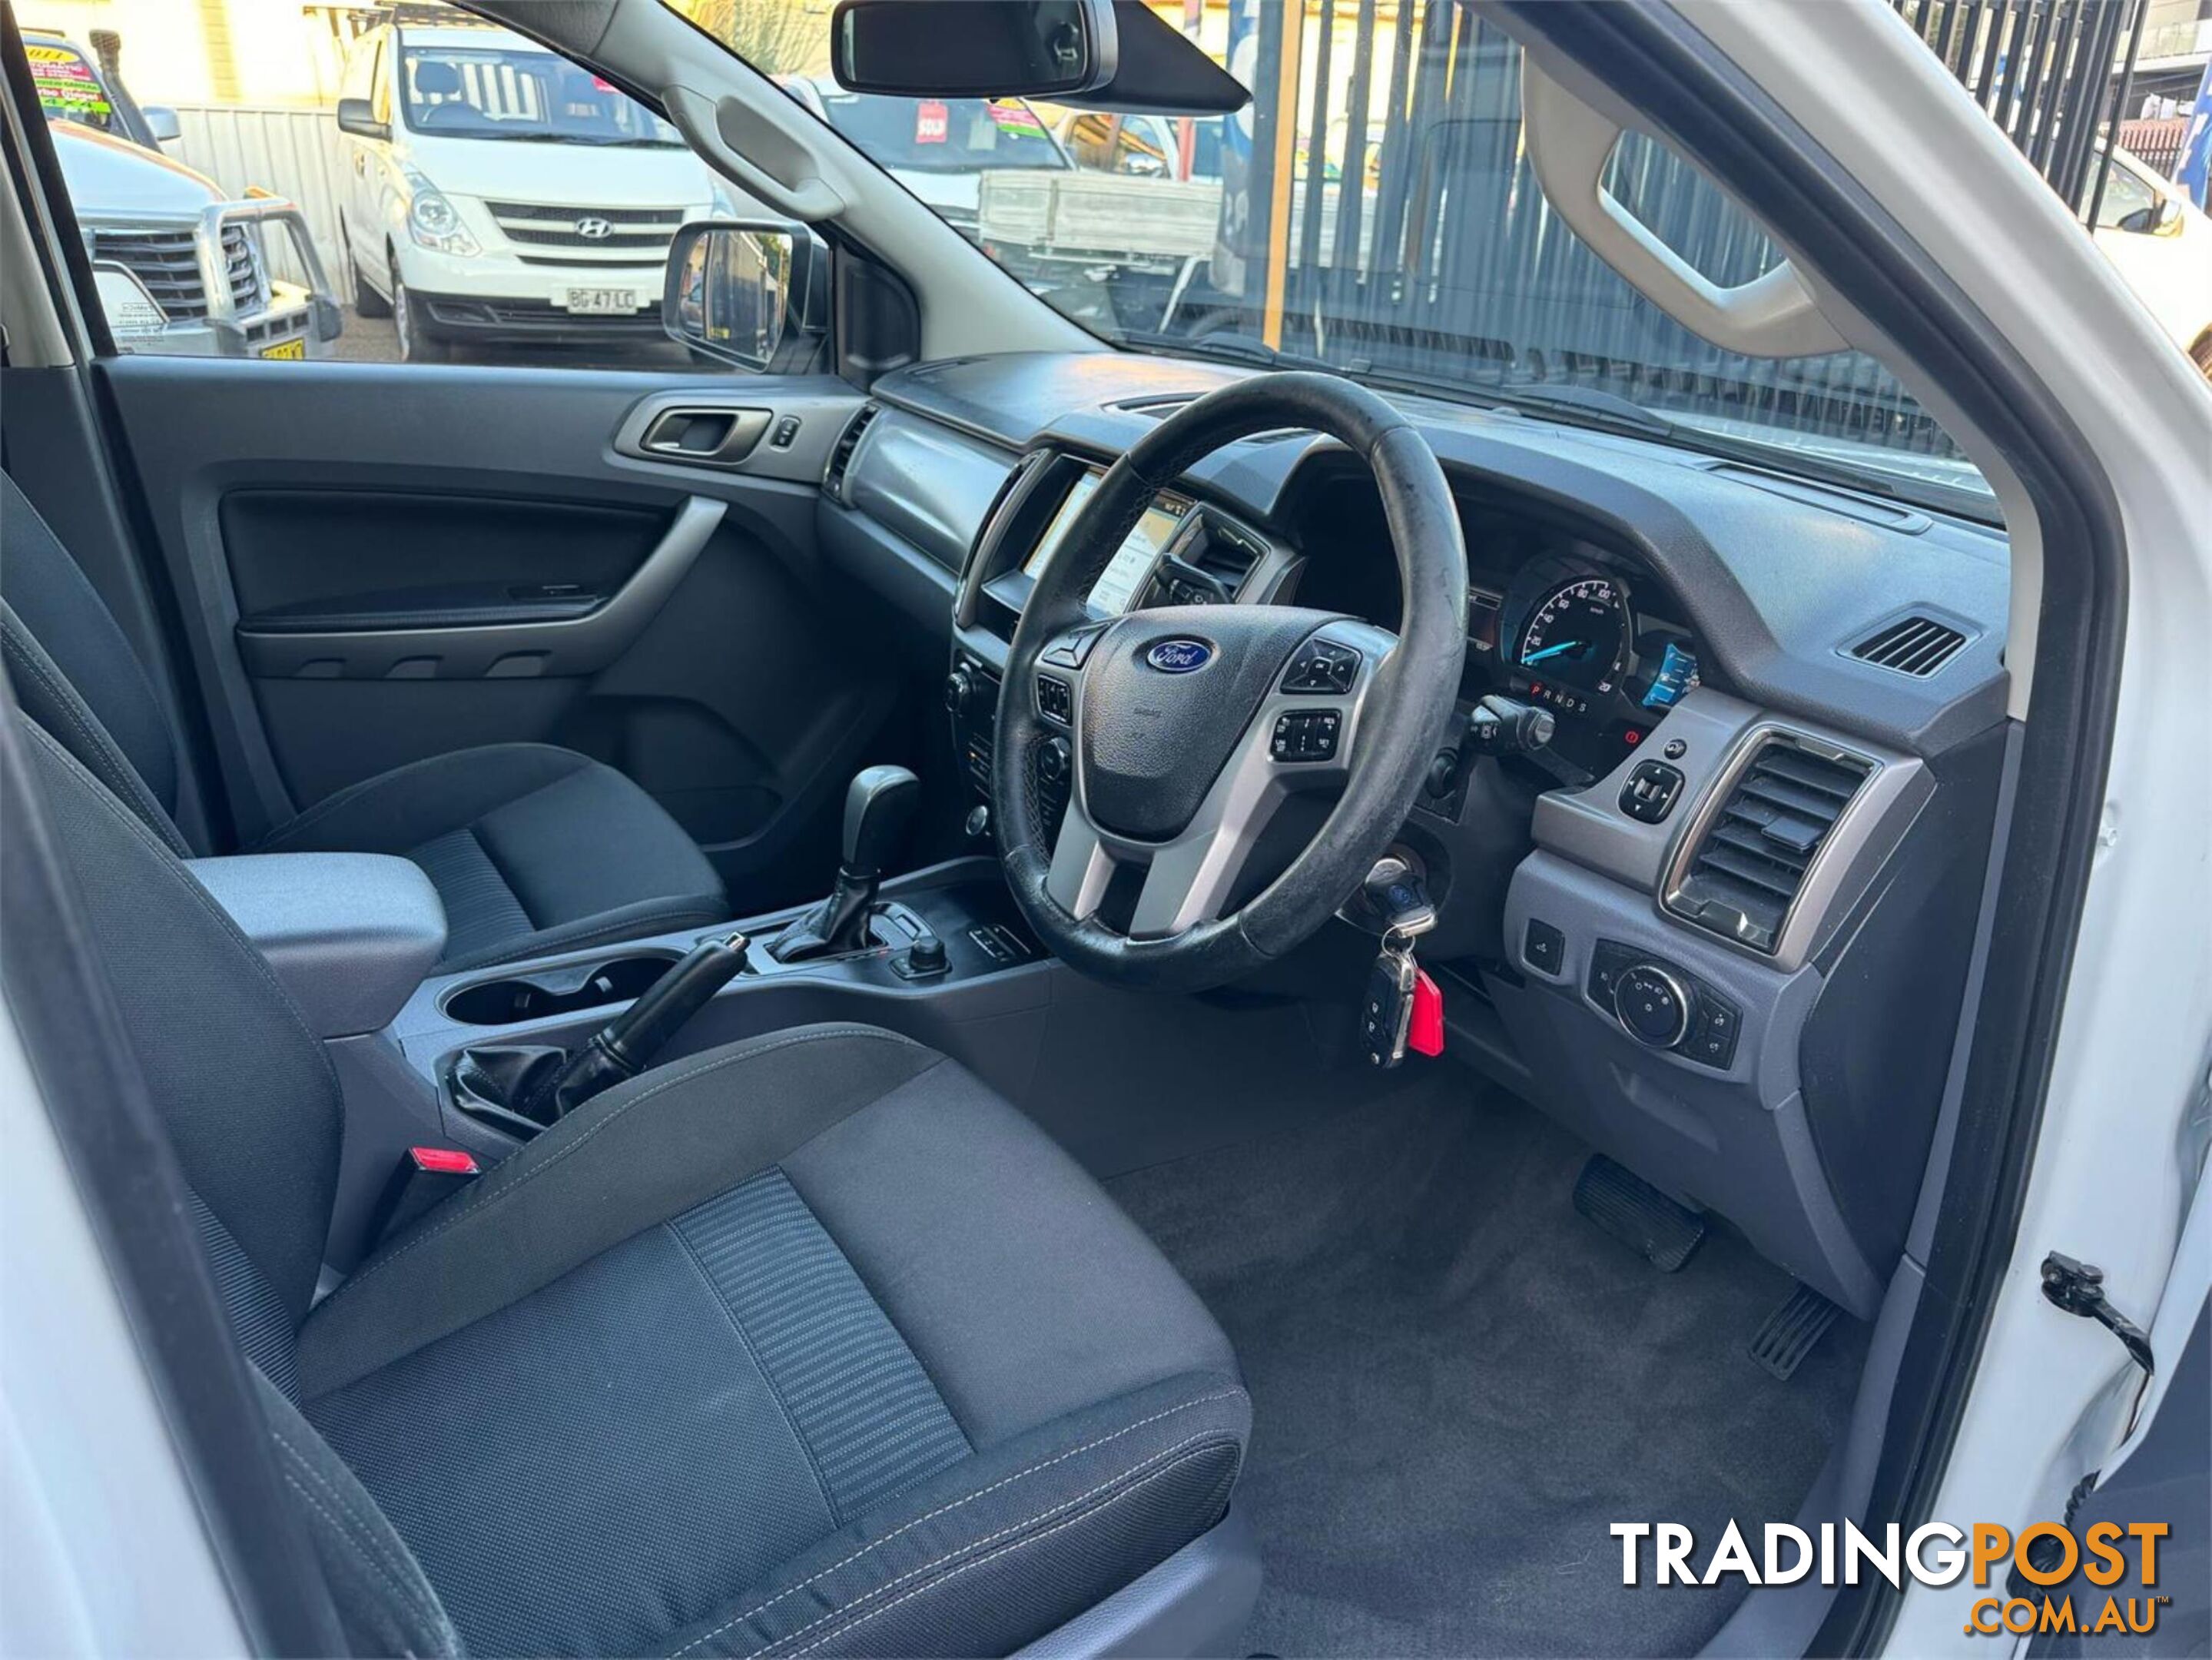 2018 FORD RANGER XLT3,2(4X4) PXMKIIMY18 DUAL CAB UTILITY